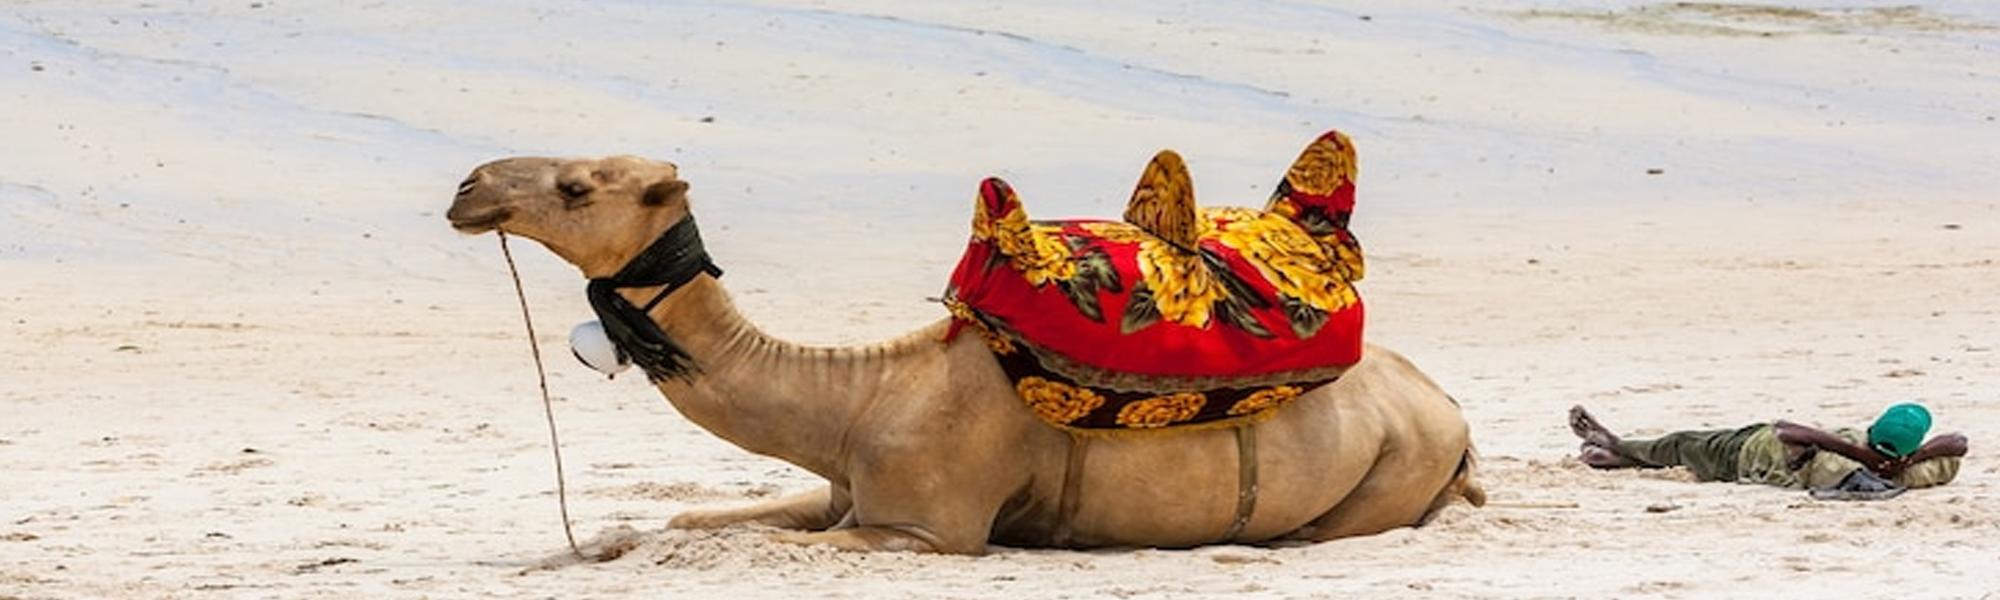 Desert Triangle Tours in India with Camel Safari Tours in India  